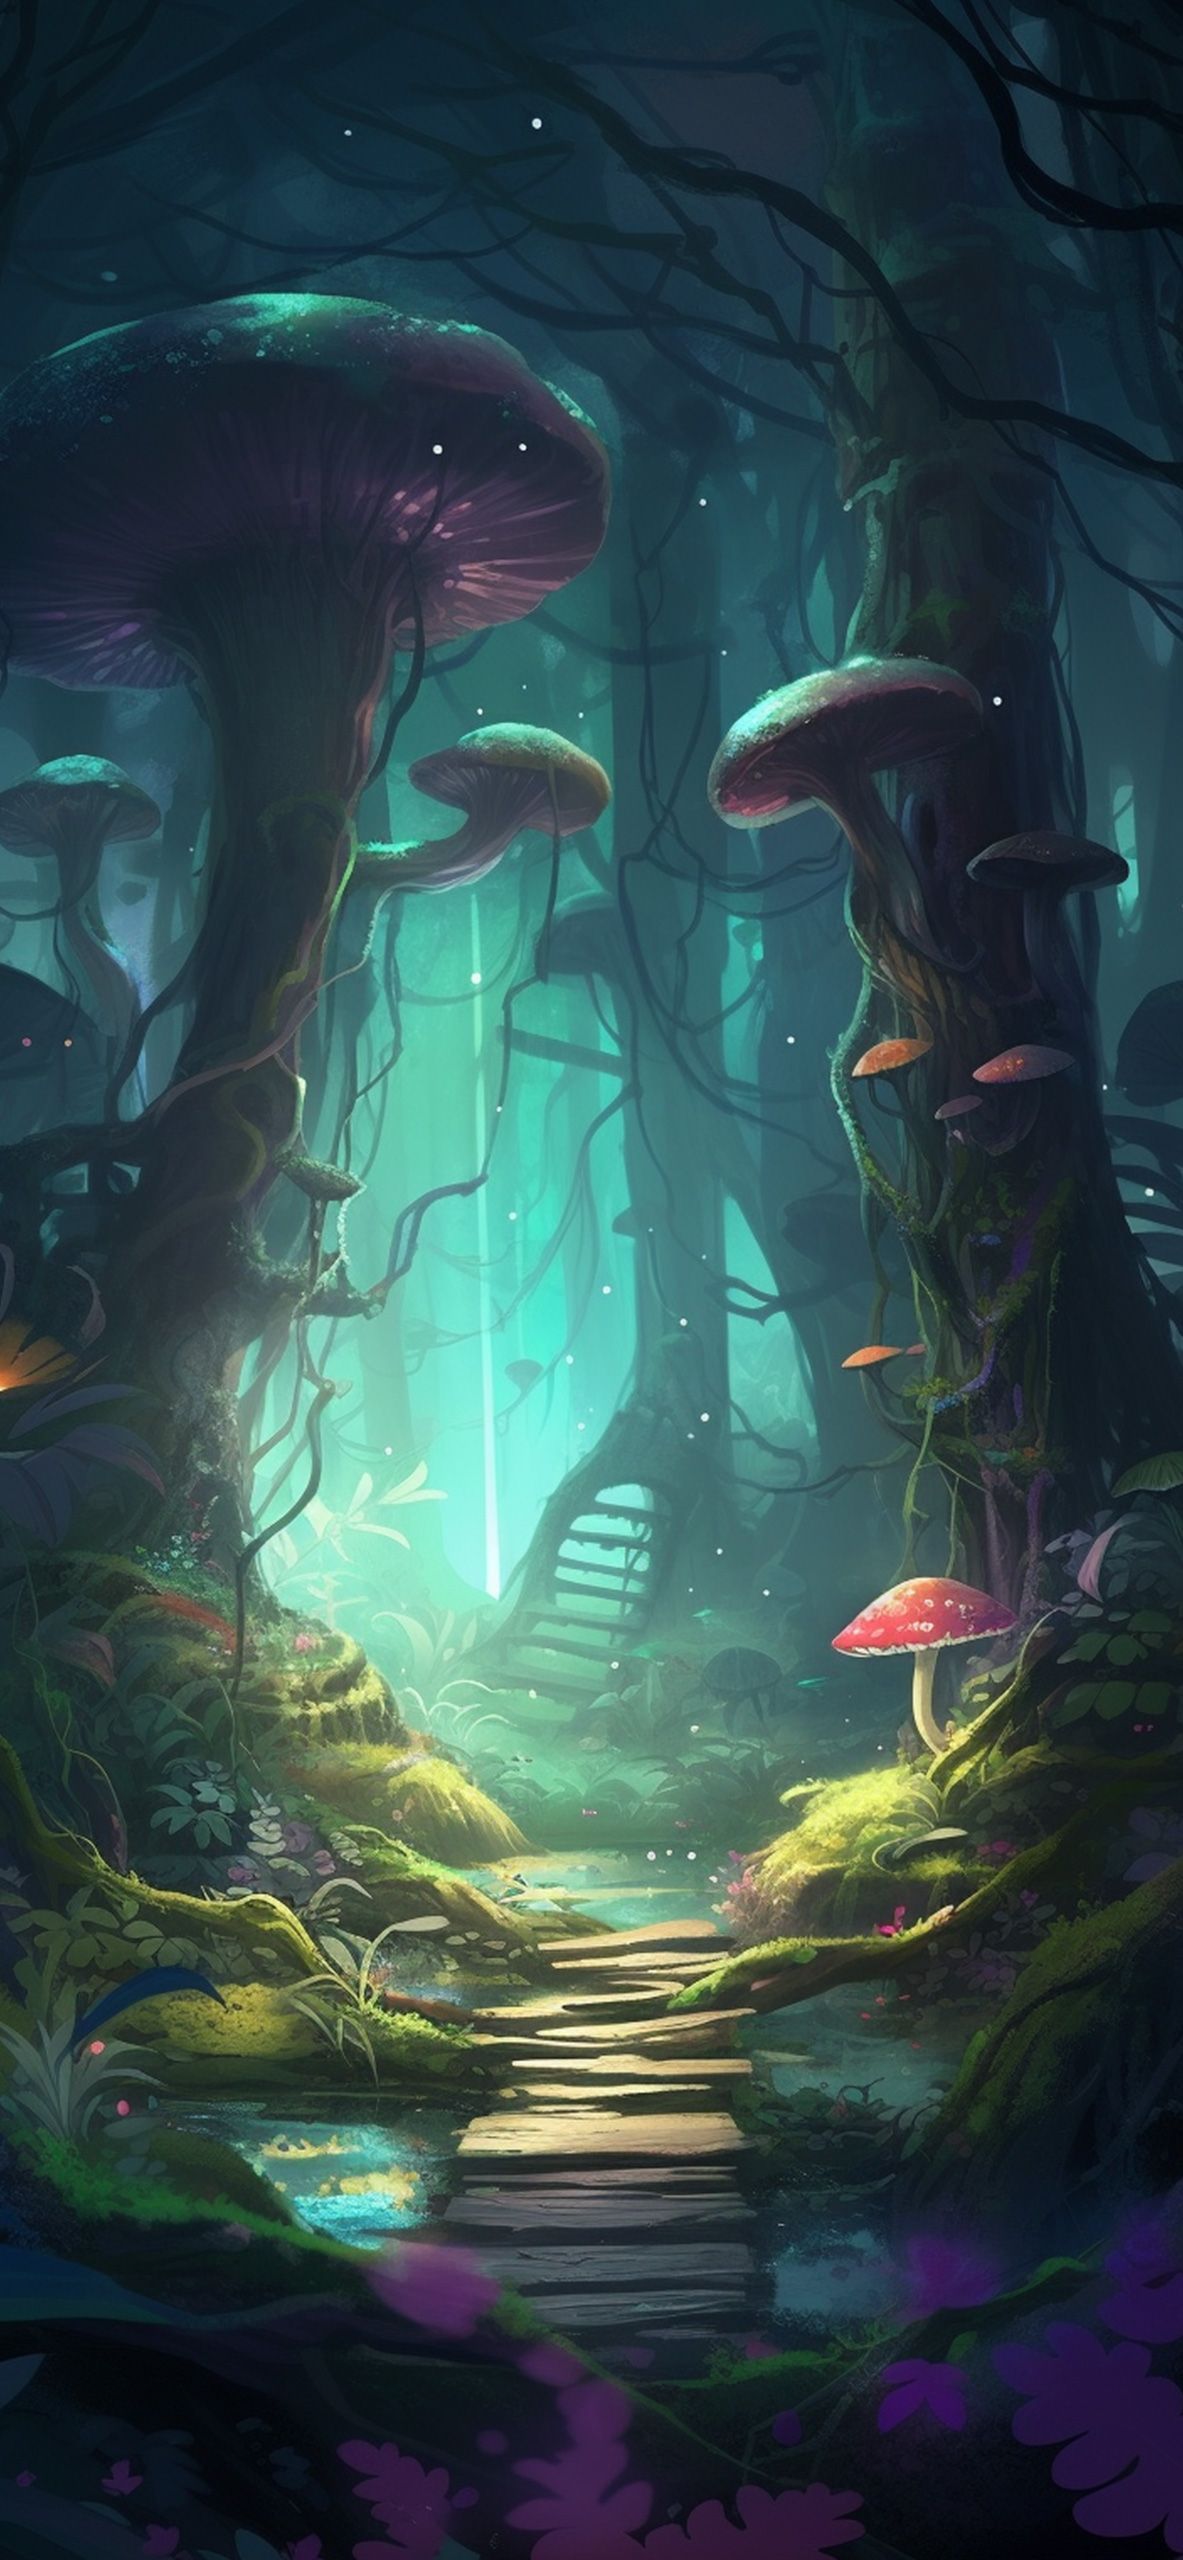 A digital painting of a fantasy forest with mushrooms and stairs - Magic